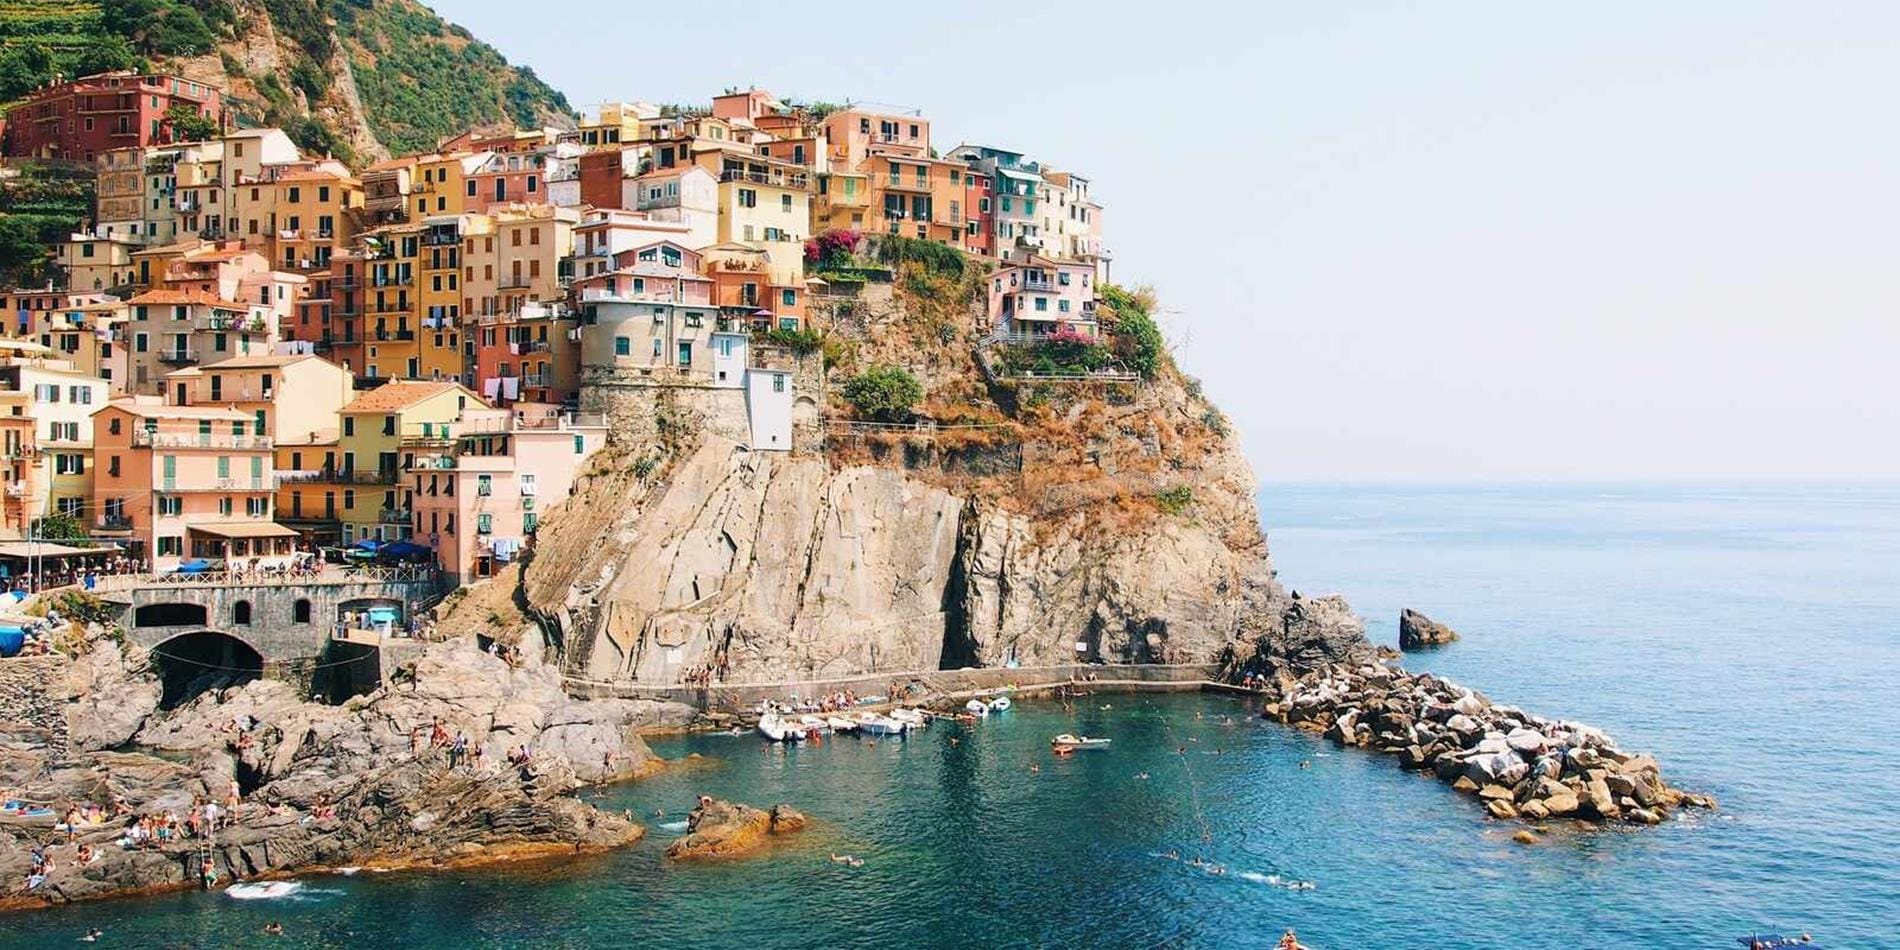 Colourful houses perched on a cliff in Cinque Terre, Italy